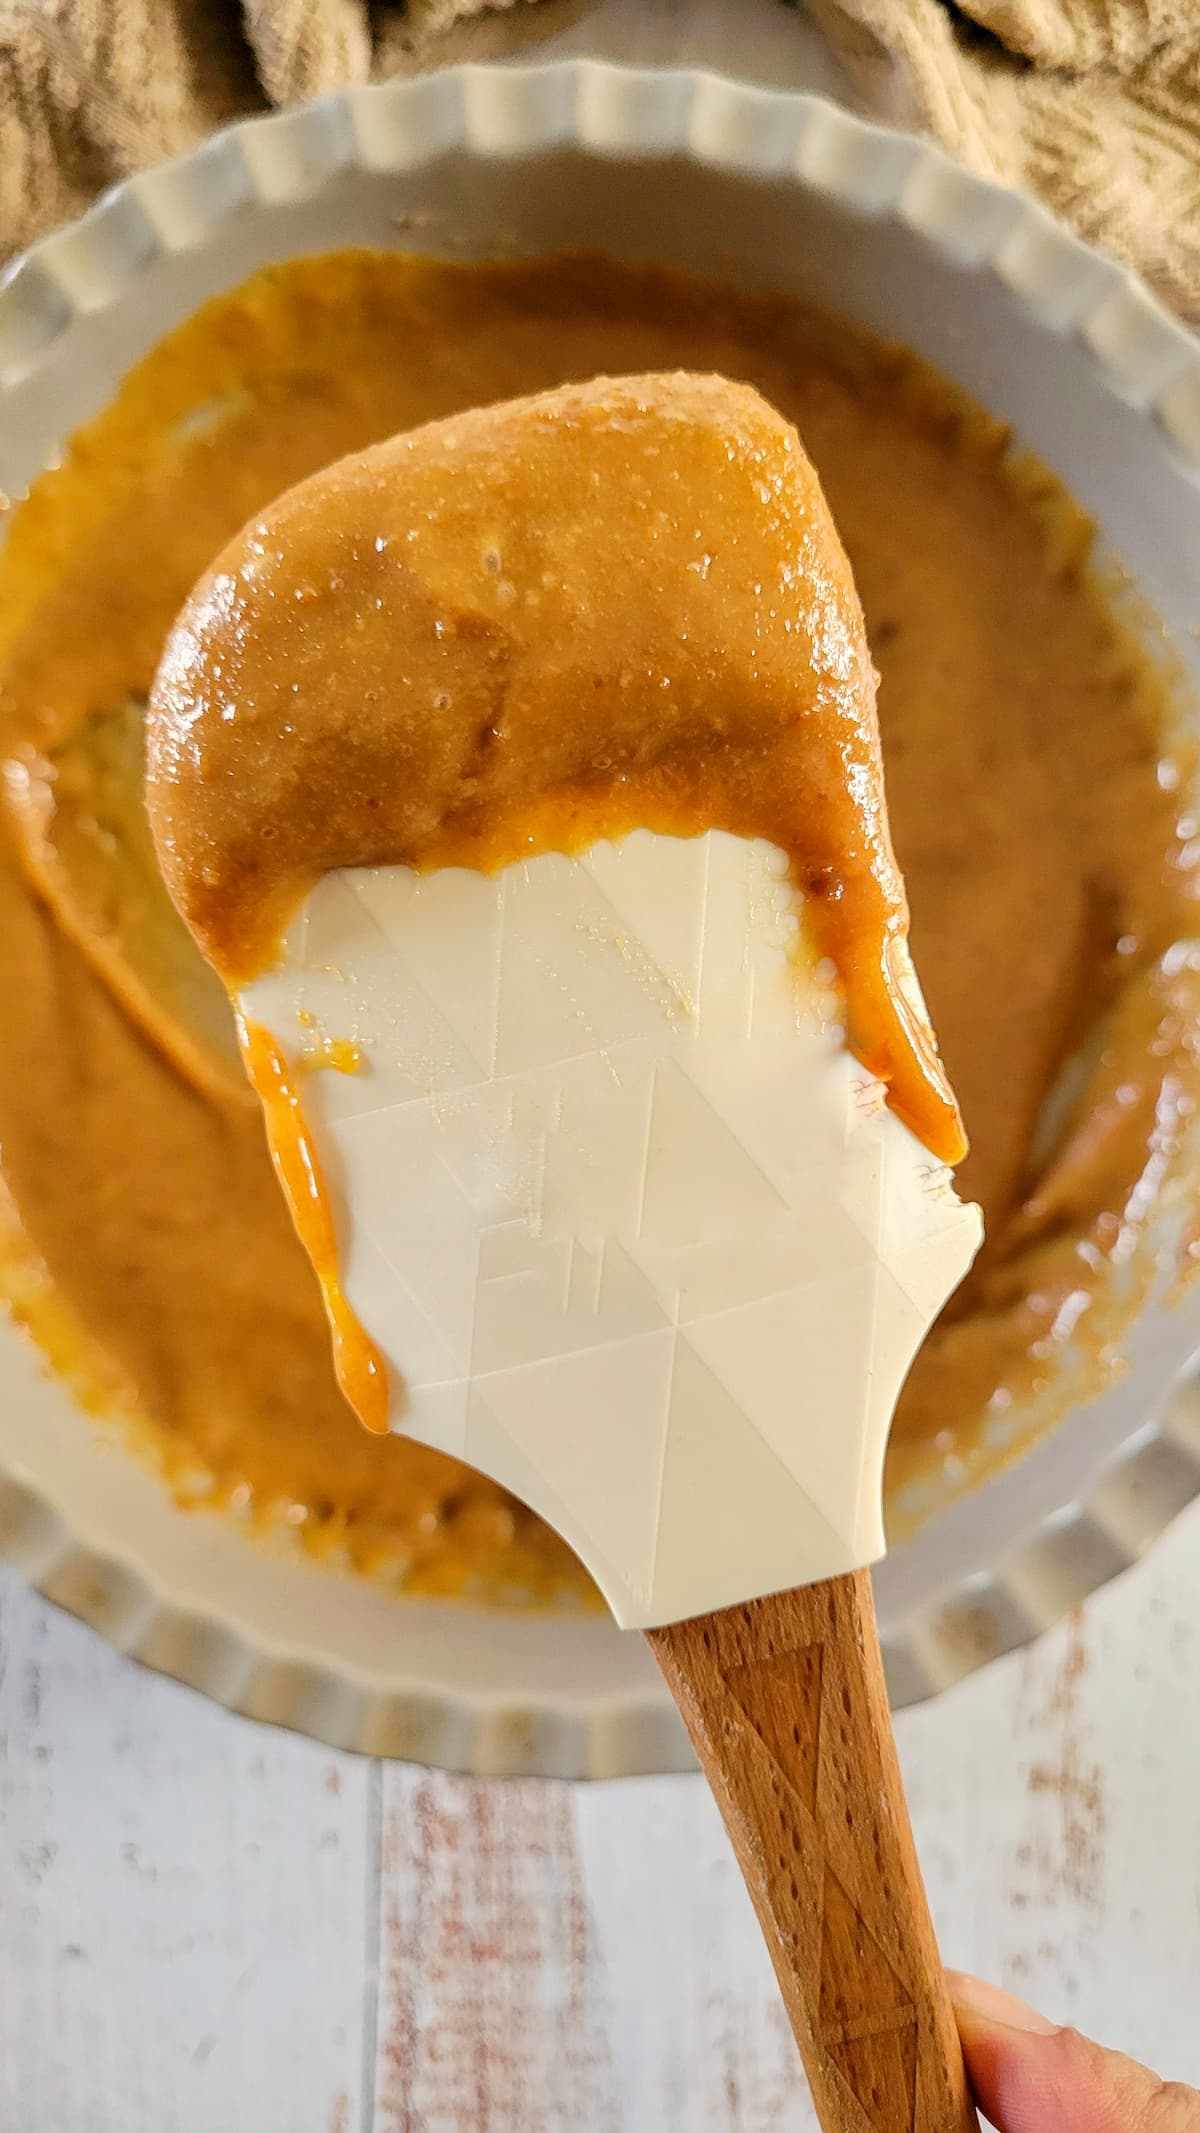 caramel sauce on a rubber spatula over a dish with more